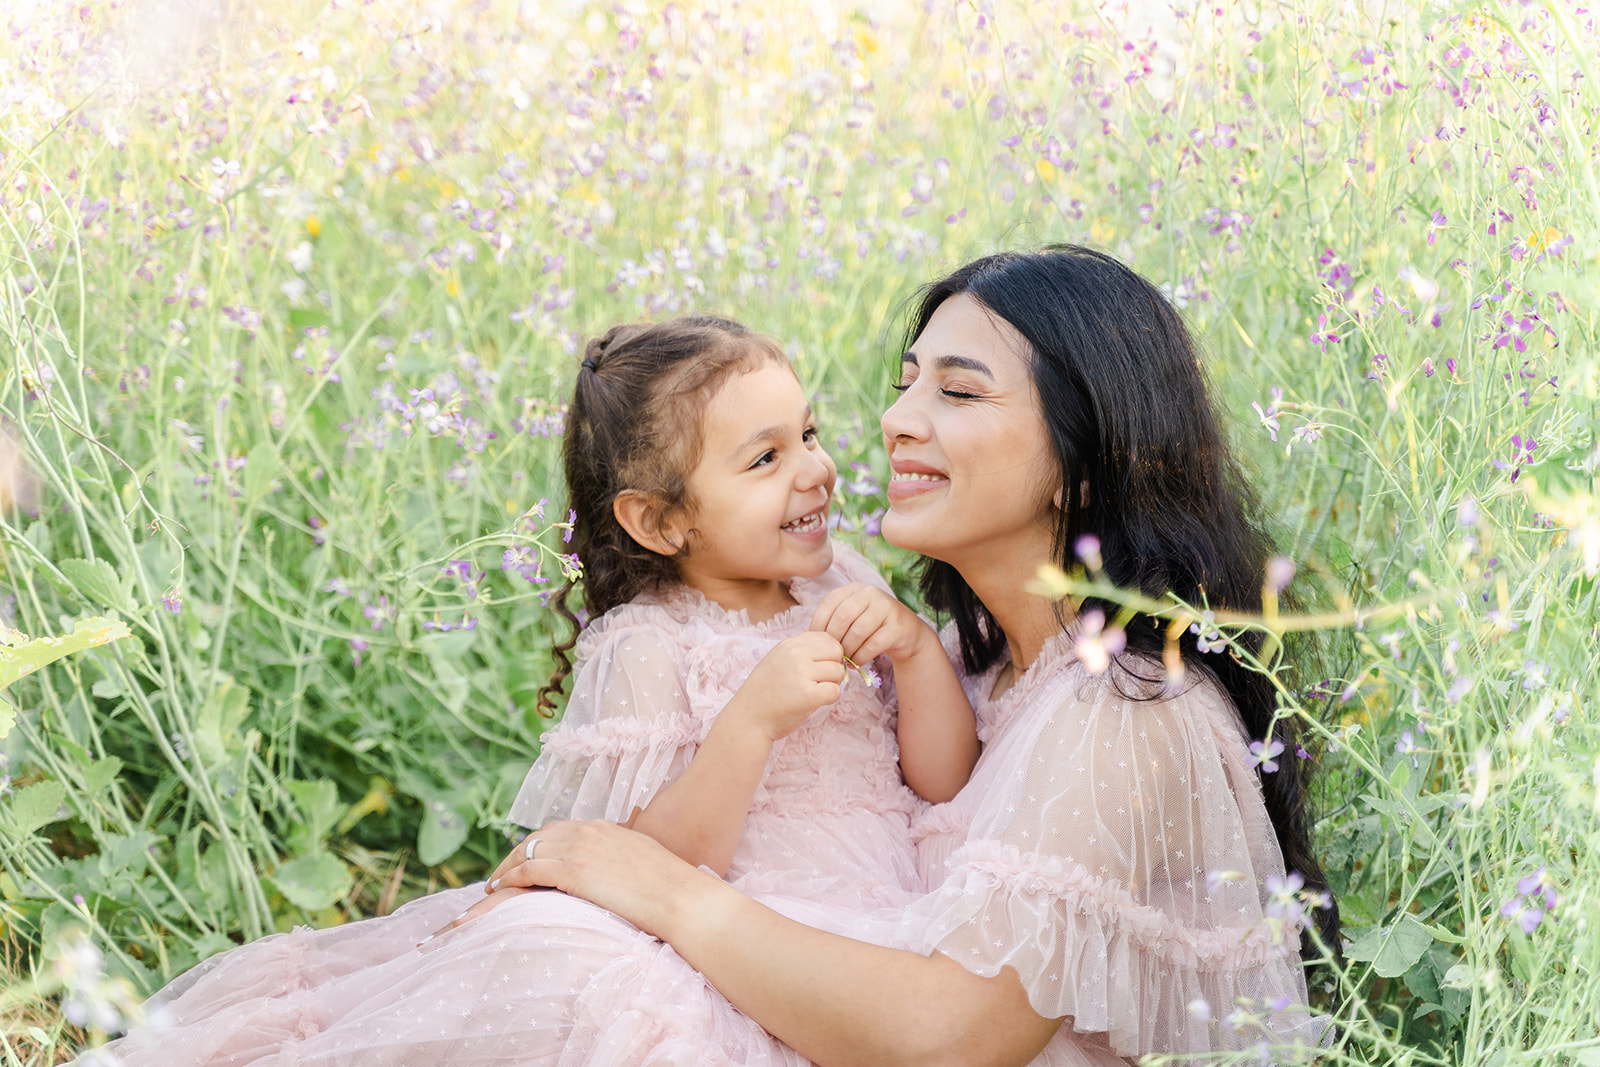 A mother in a pink dress sit in a field of wildflowers with her daughter in a matching dress after visiting Daycares in Irvine